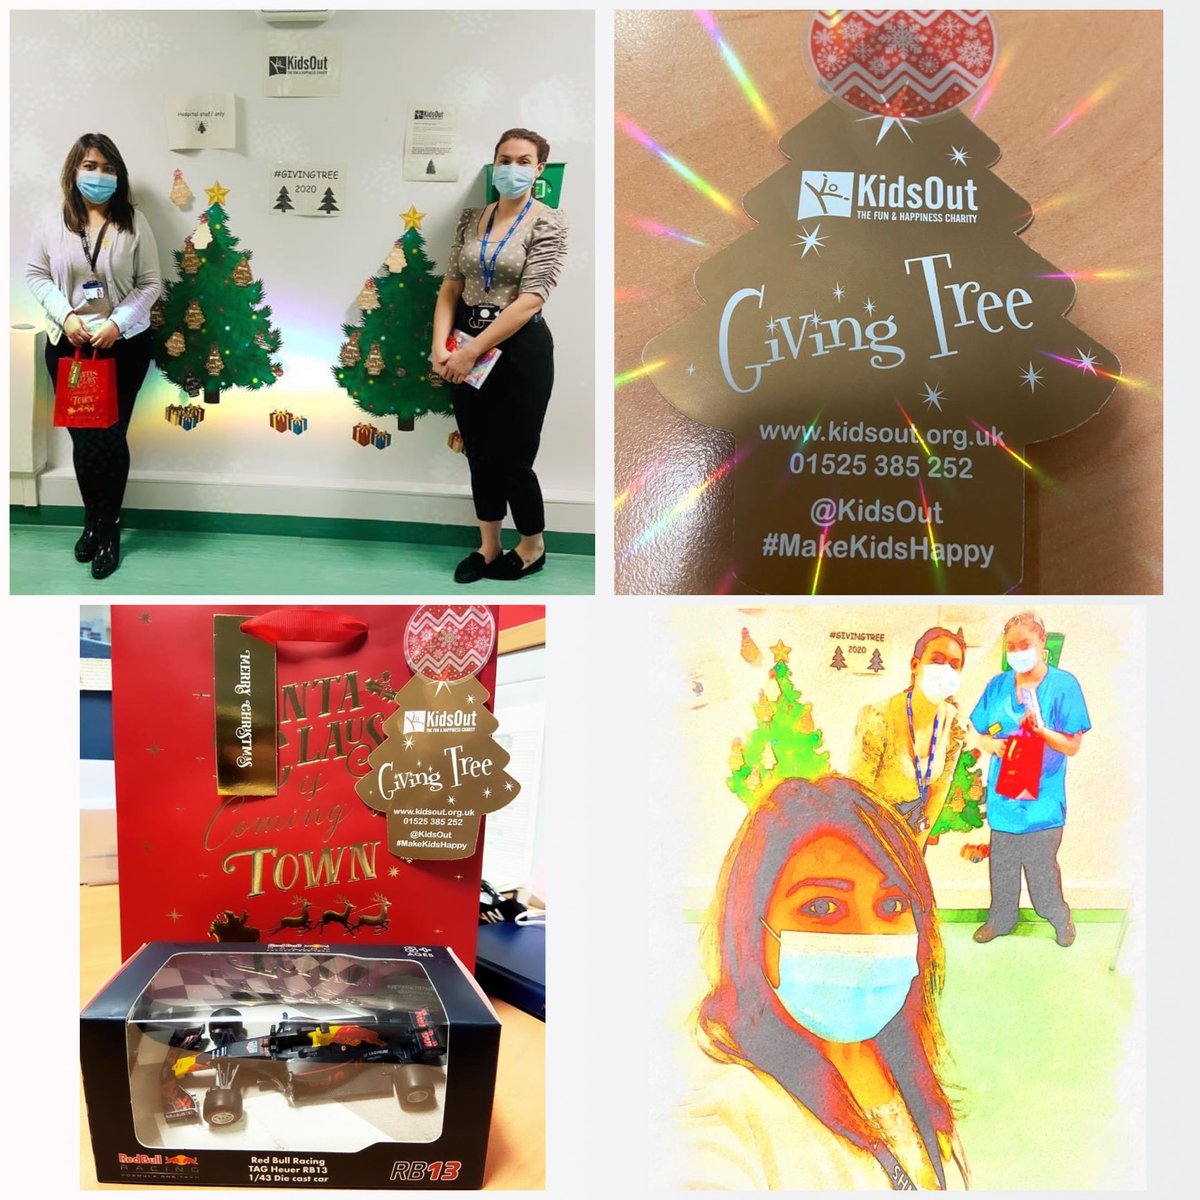 ‘Giving is not just about making a donation, it’s about making a difference.’ #Christmas2020🎄#charityevent ⁦@uhbtrust⁩ #givingtree 💖 ⁦⁦@UHBCharity⁩ ⁦@HeartlandsUHB⁩